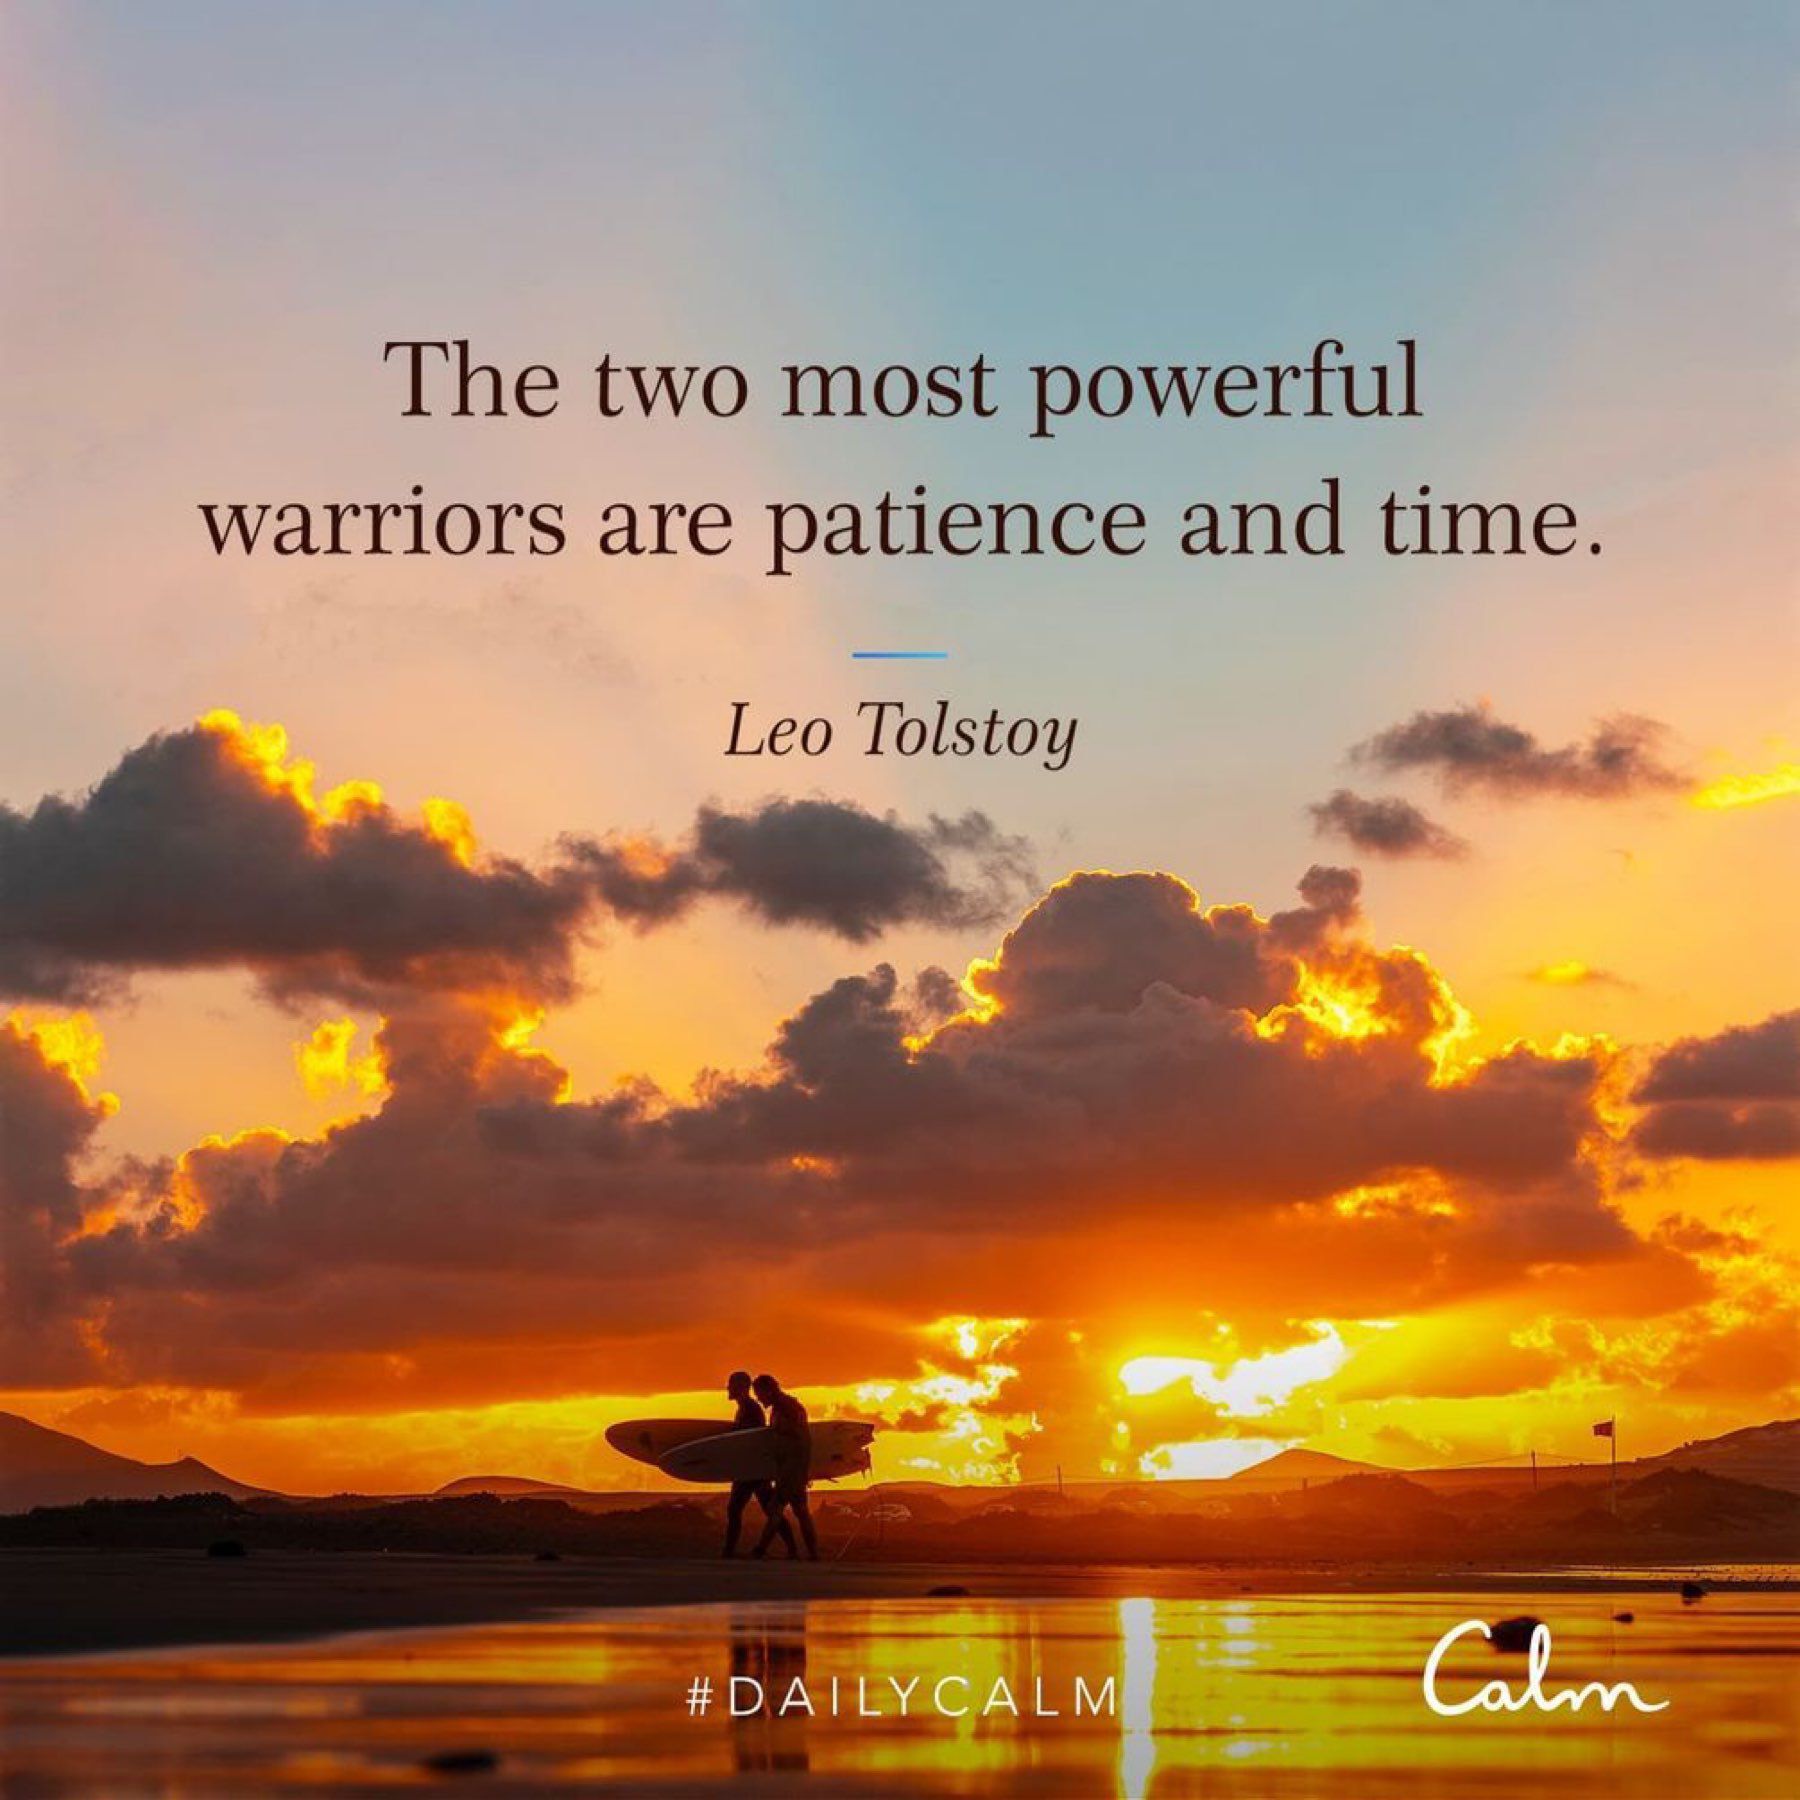 The two most powerful warriors are patience and time